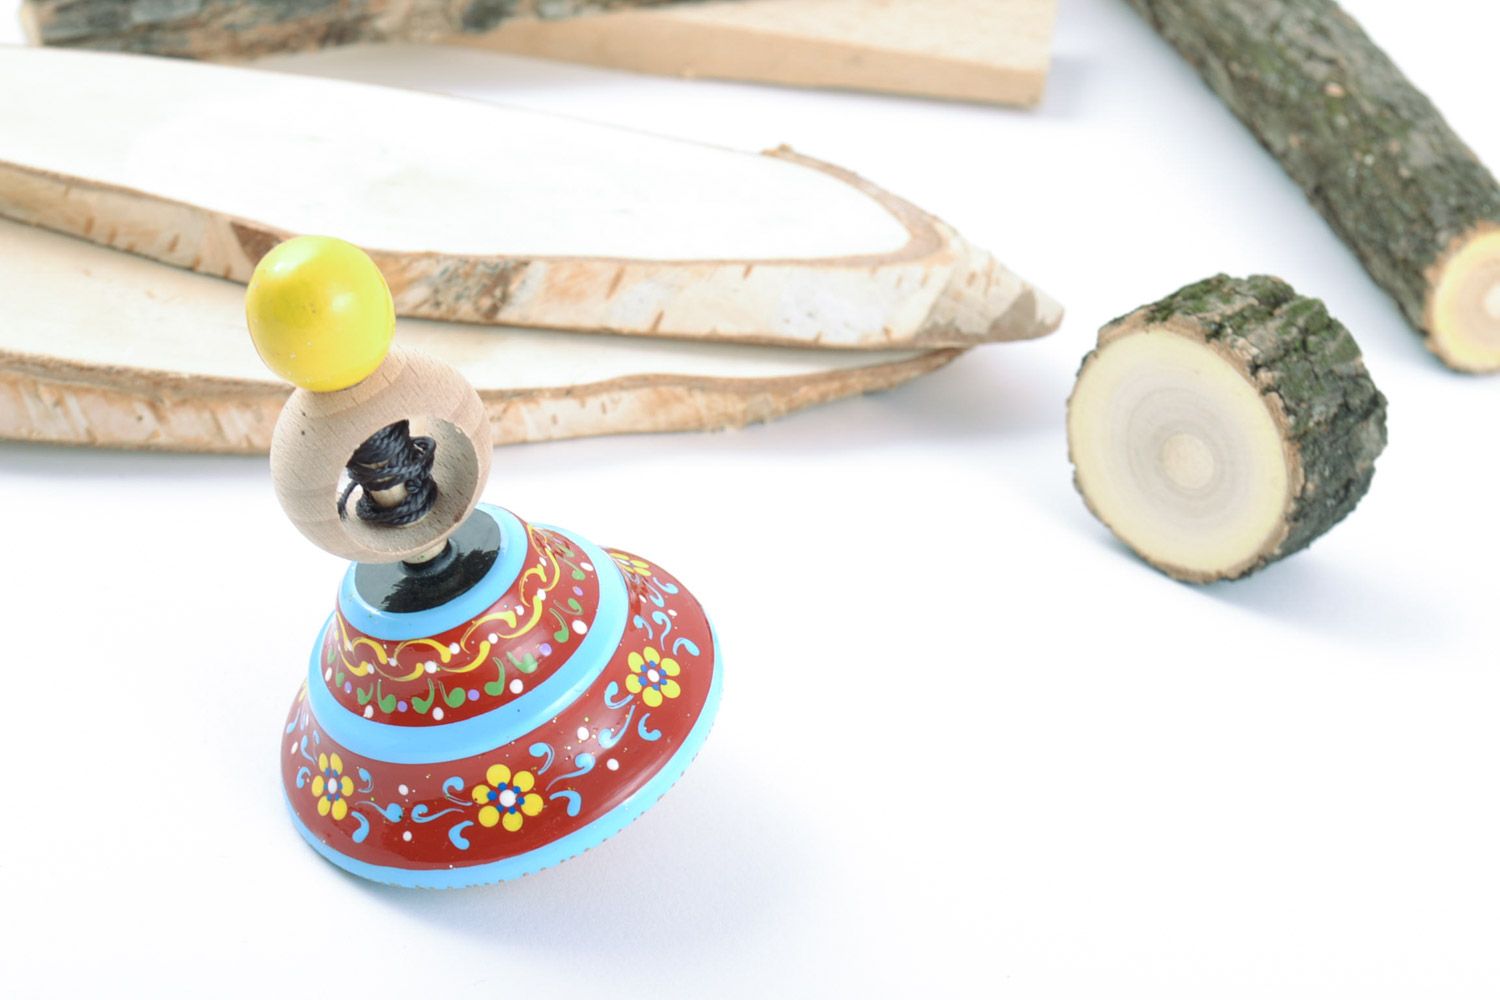 Handmade wooden eco toy spinning top with ring for fine motor skills development photo 1